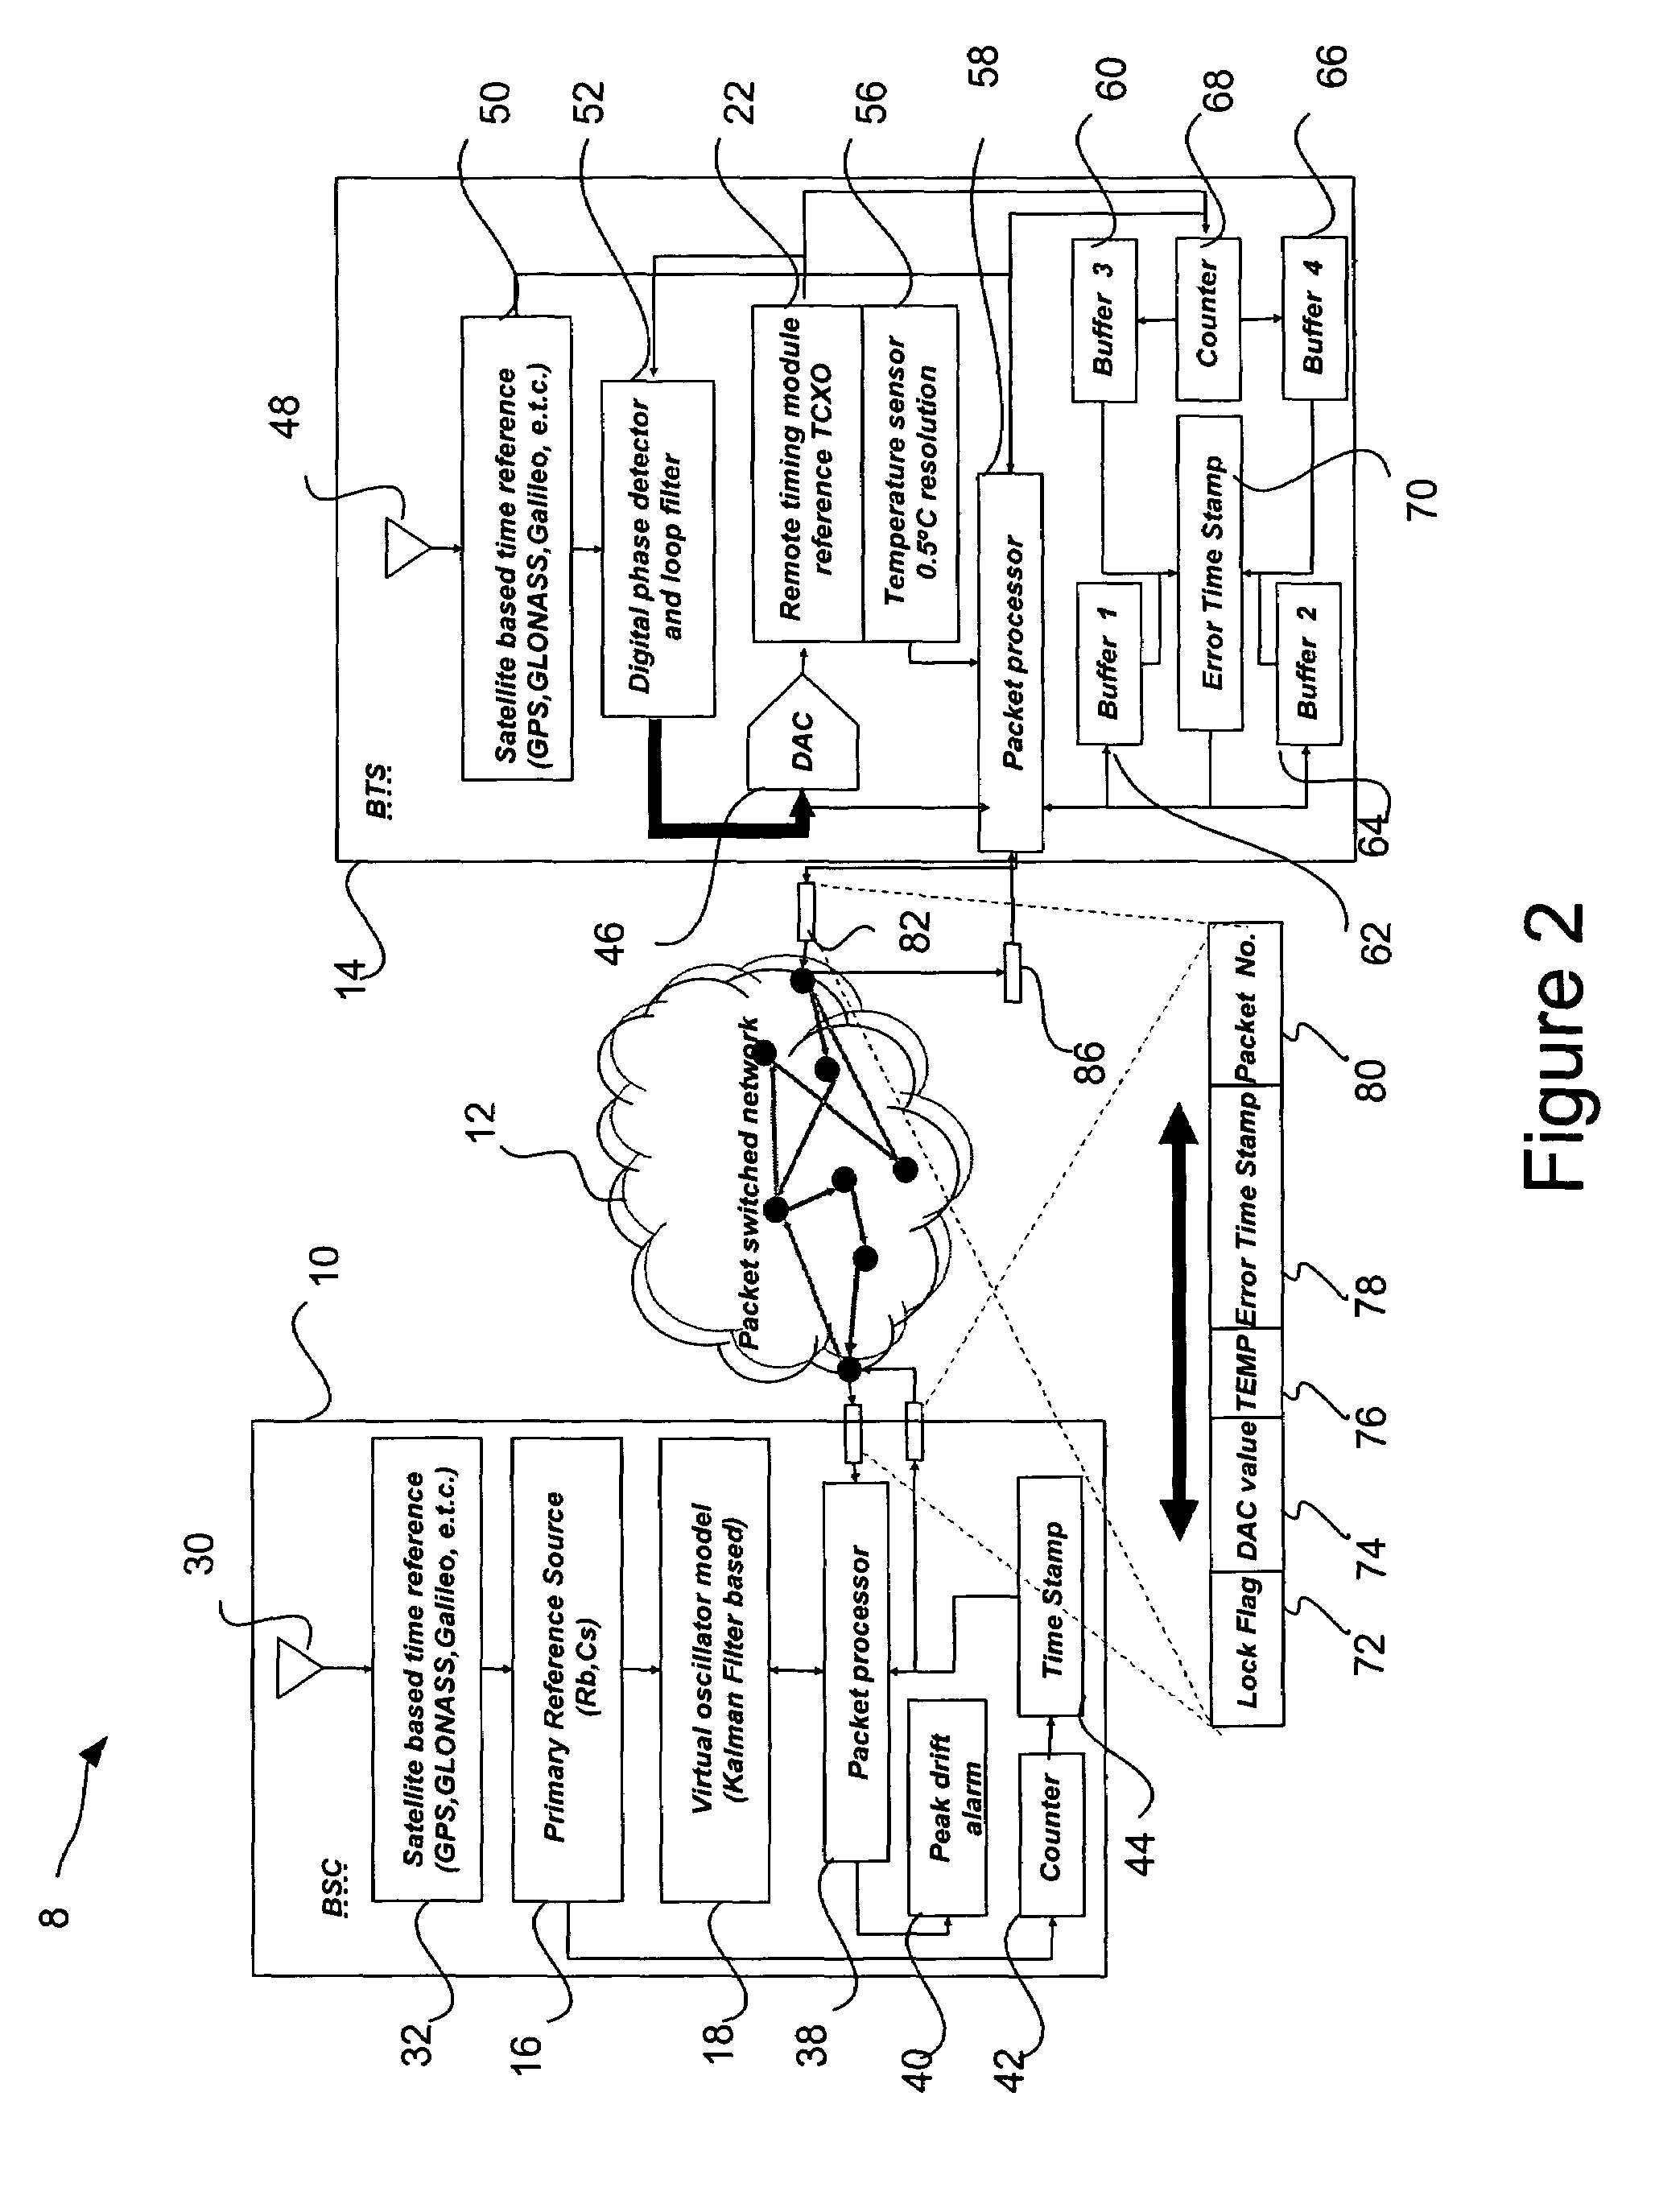 Enhanced holdover for synchronous networks employing packet switched network backhaul